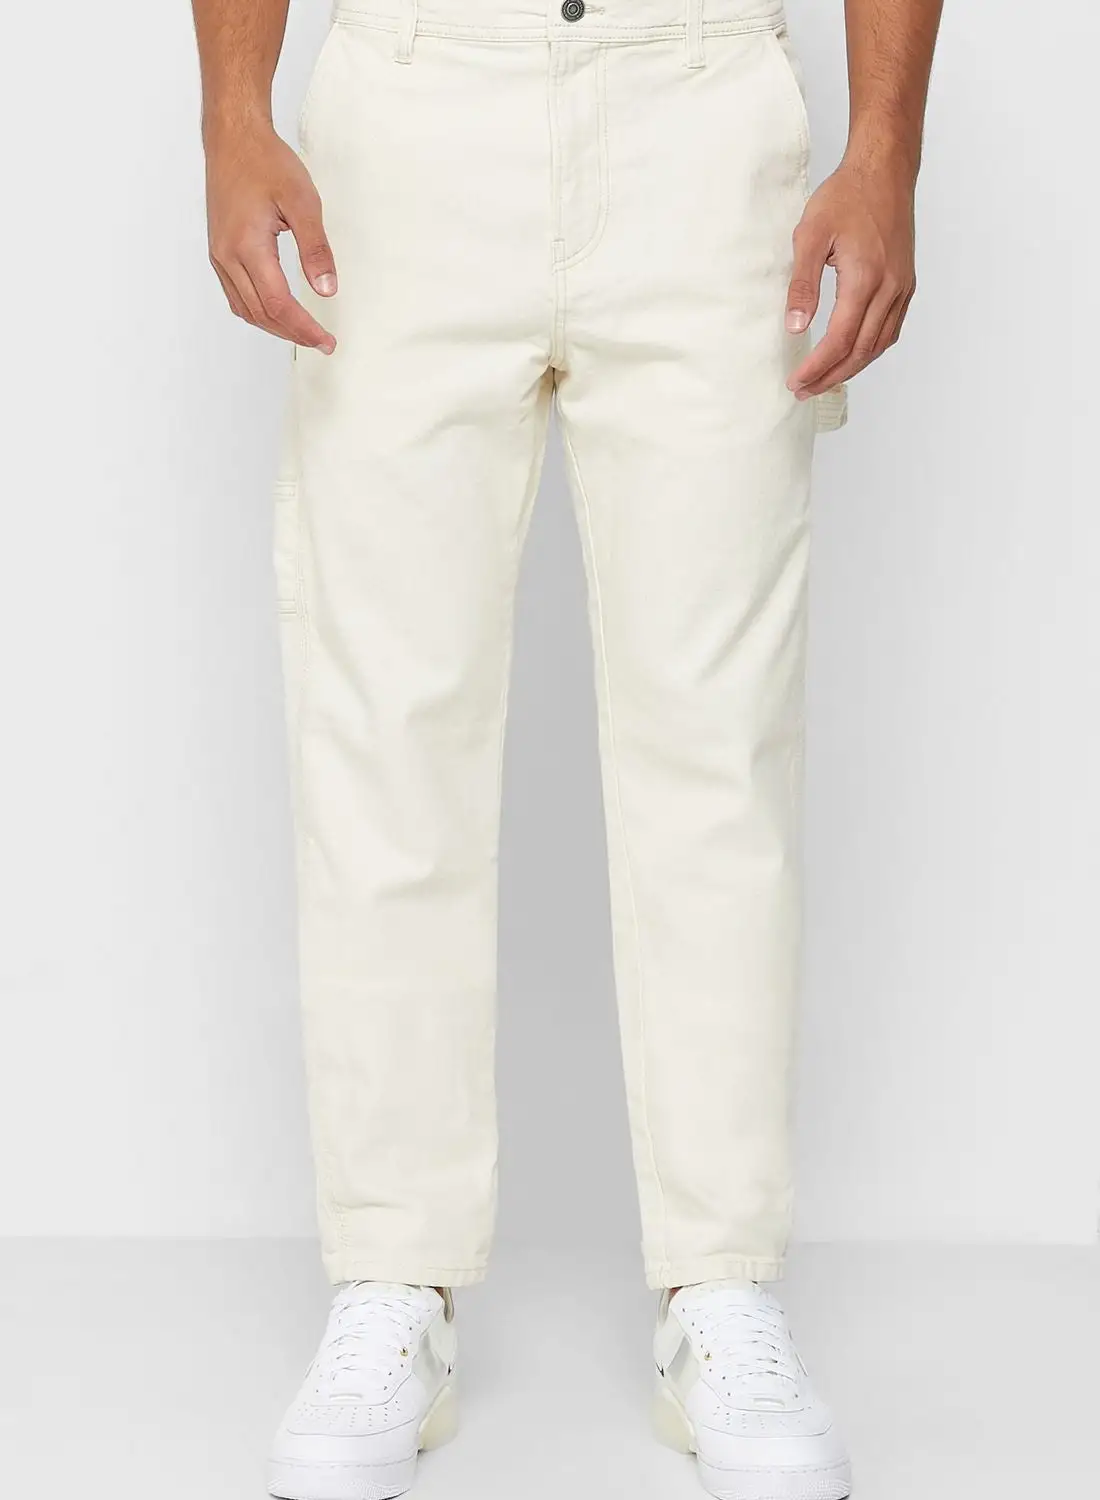 Cotton On Light Wash Relaxed Fit Jeans